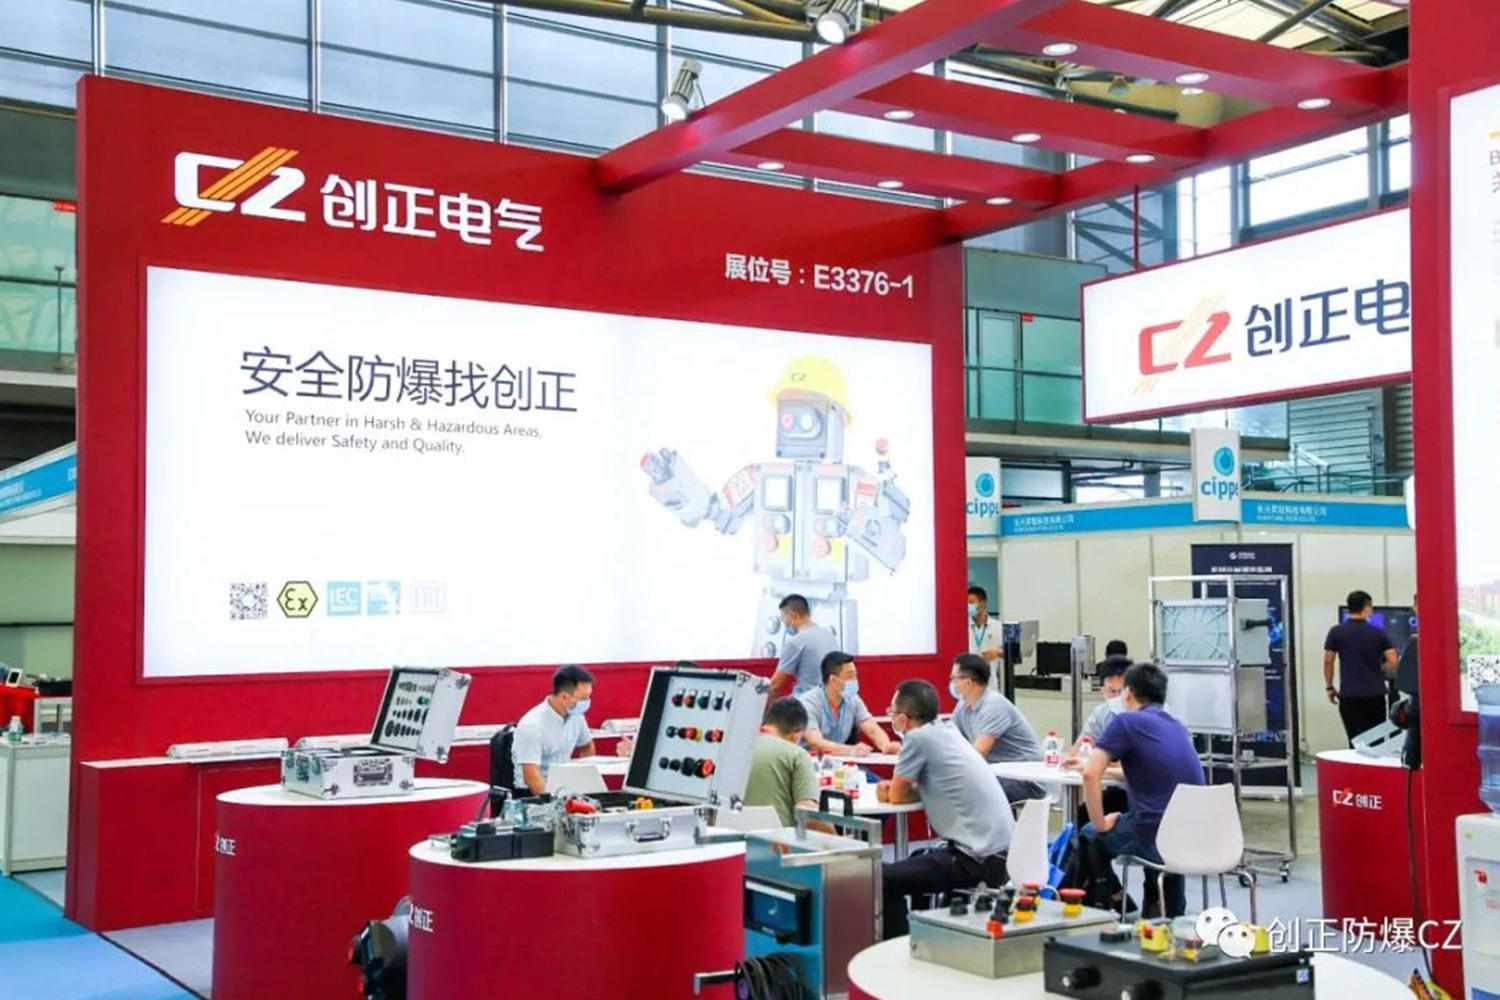 The first show in the 2020 exhibition-Chuangzheng Electric brings new products to Cippe2020